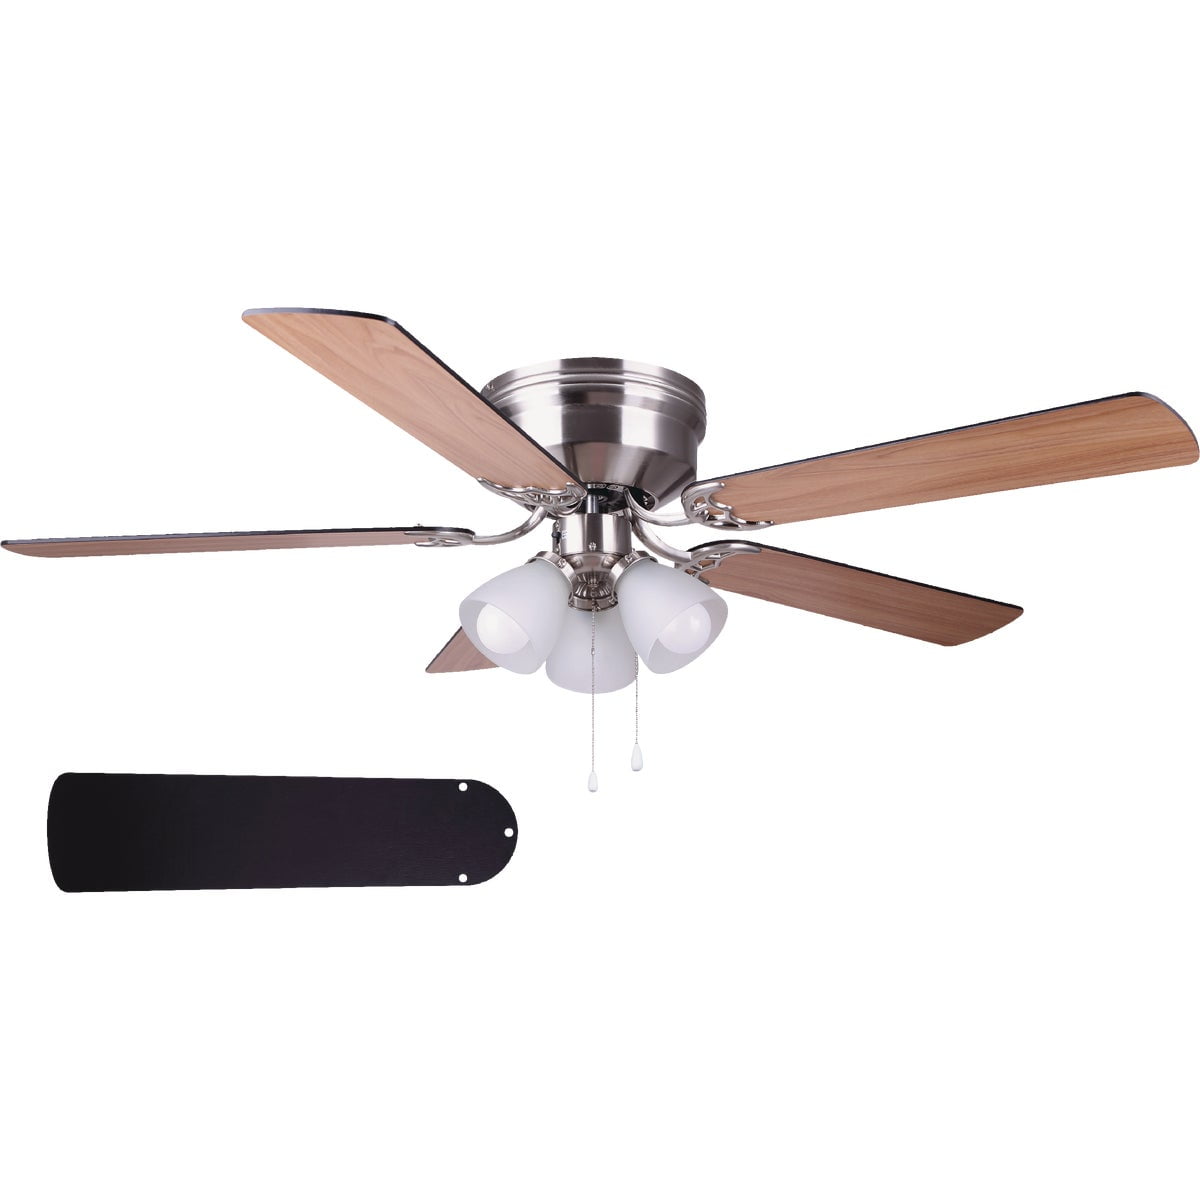 Brushed Nickel Ceiling Fan Replacement Parts Carrolton II LED 52 in 